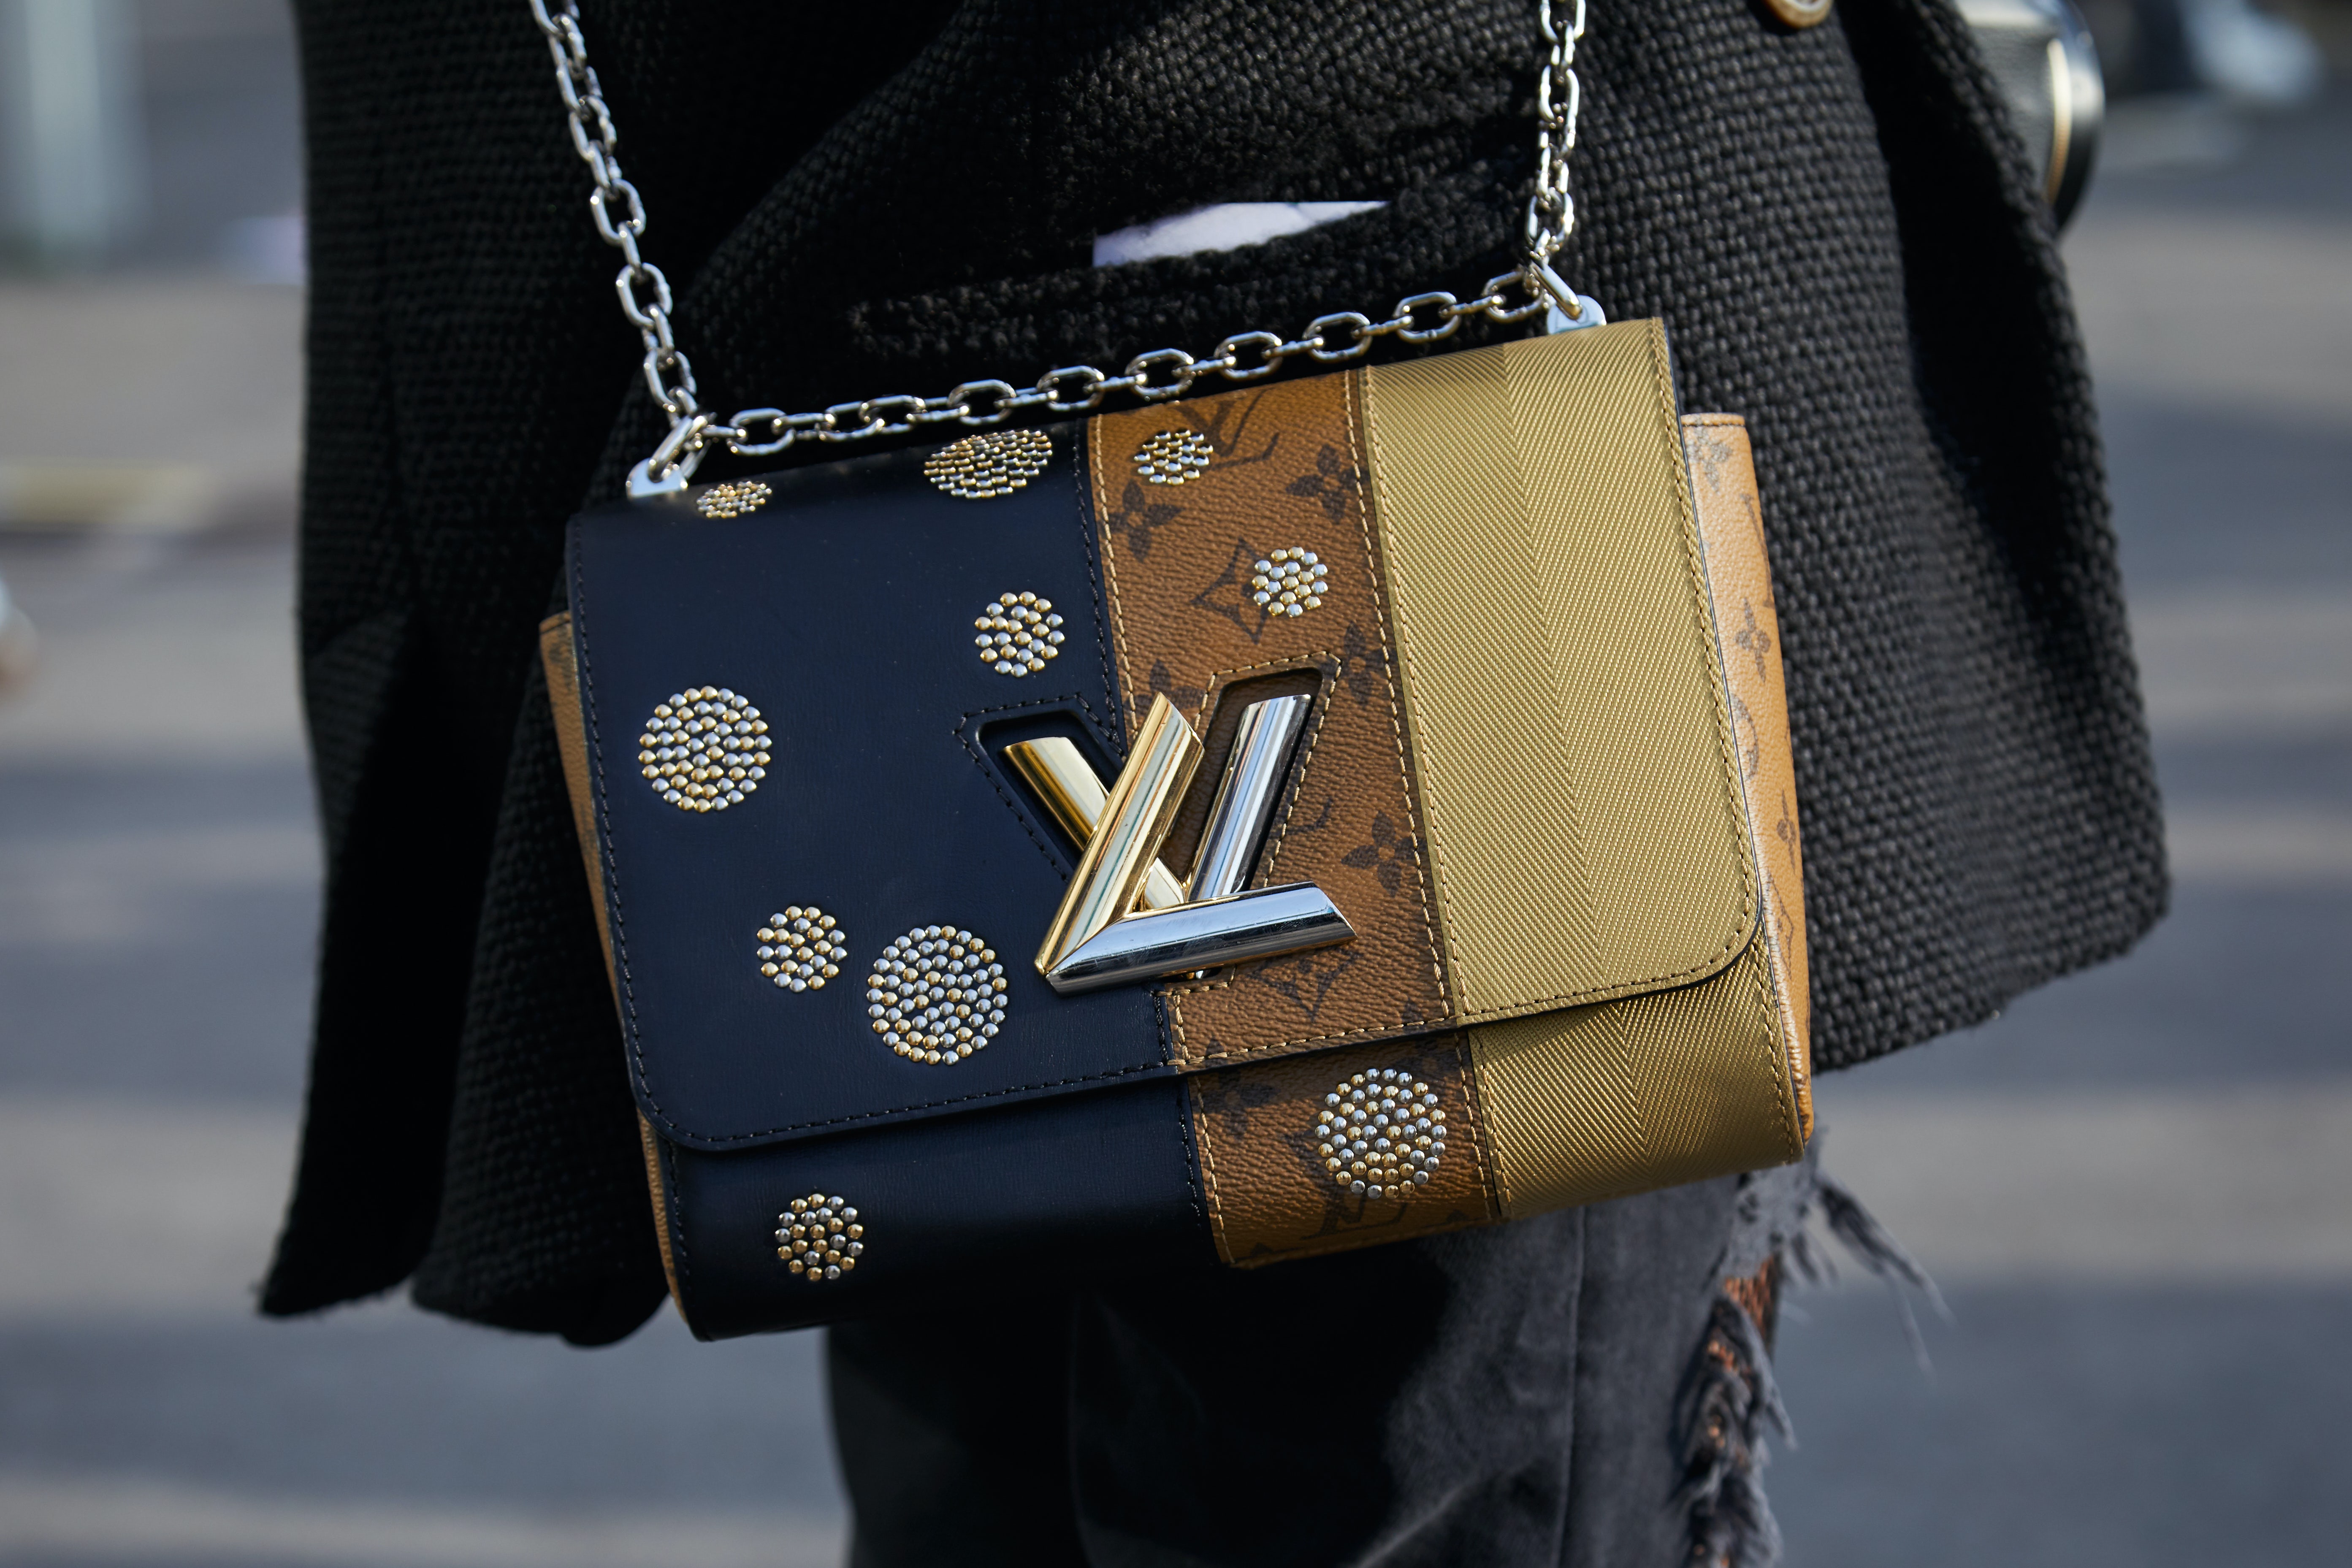 TJP on X: Little reminder that the LVMH corporation owns Celine